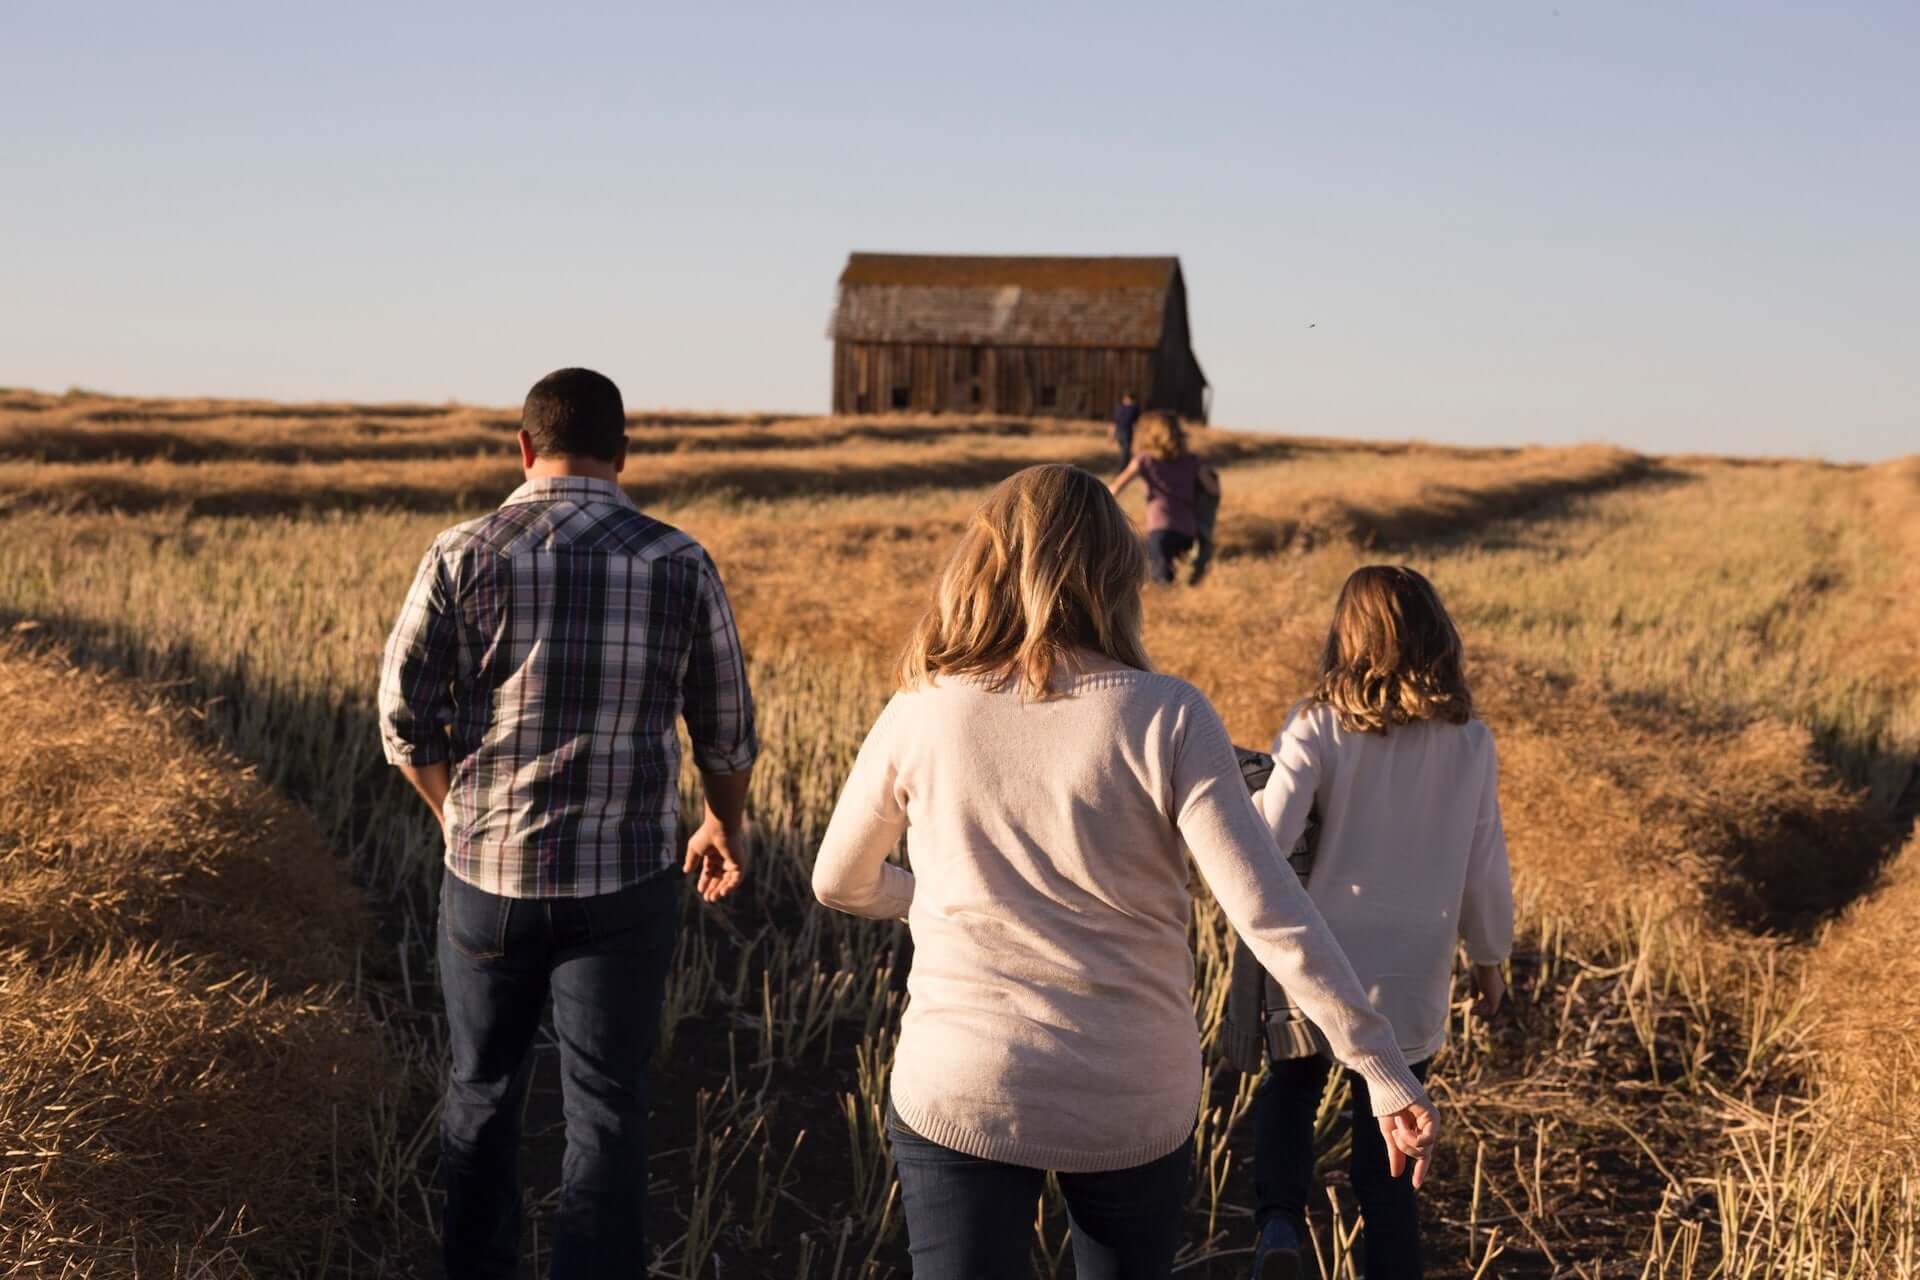 A family with backs to the camera walks through a grassy field in the late afternoon.